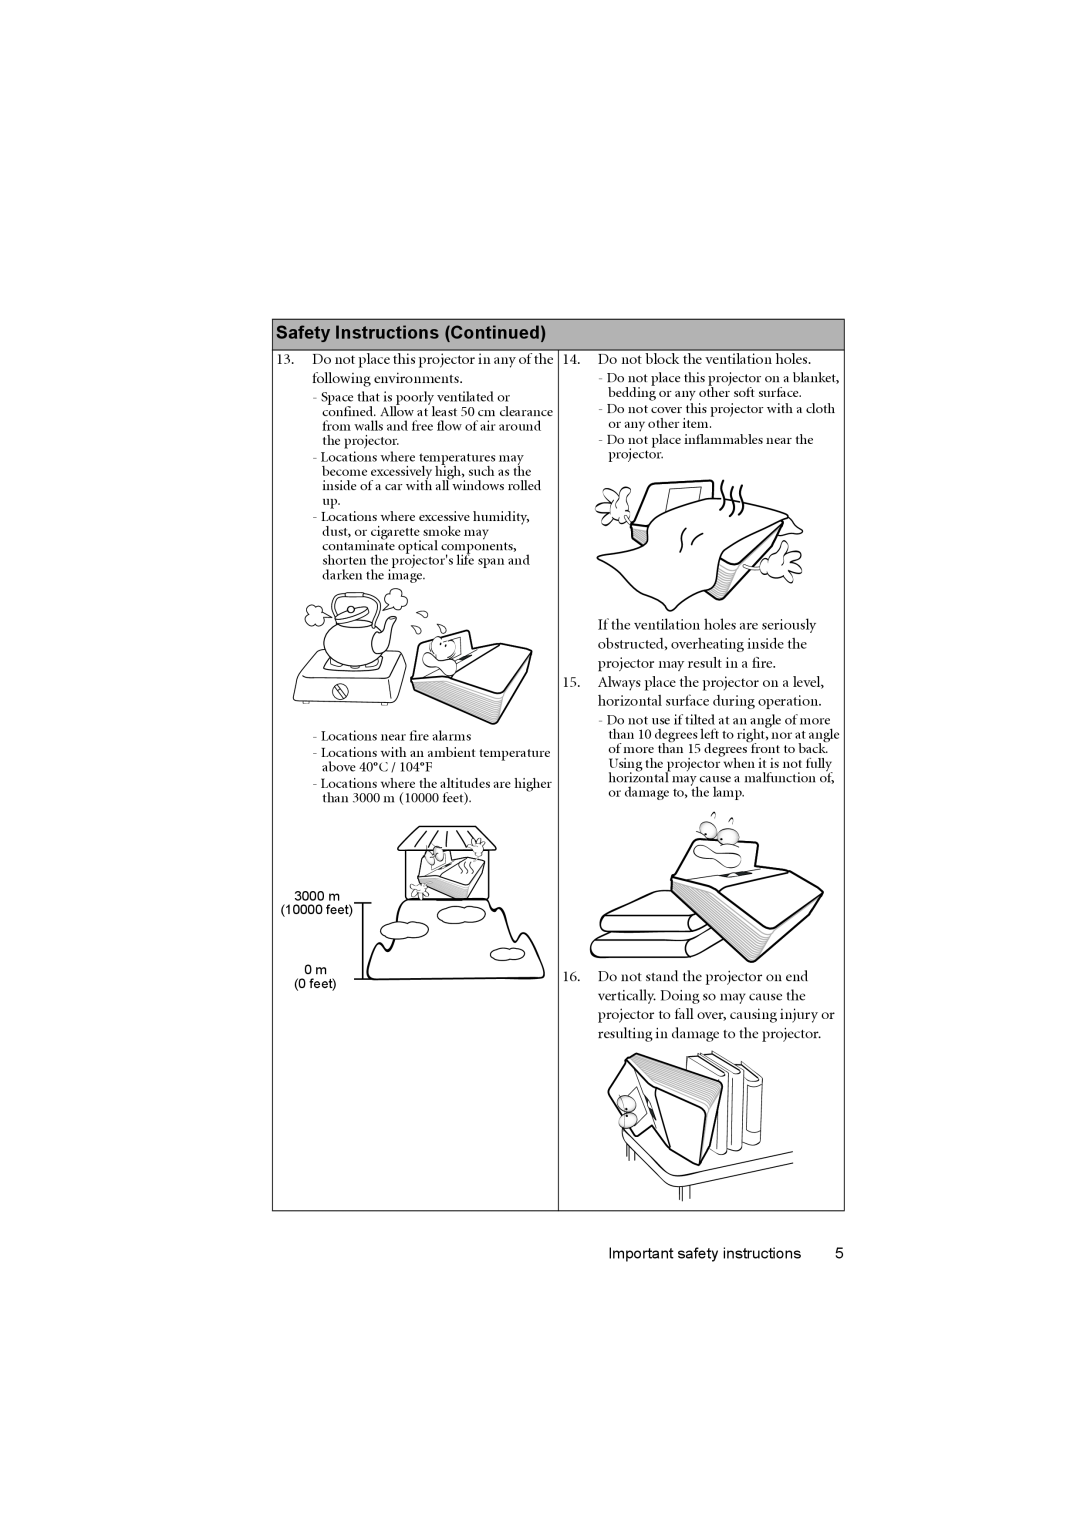 BenQ MX880UST user manual Always place the projector on a level 